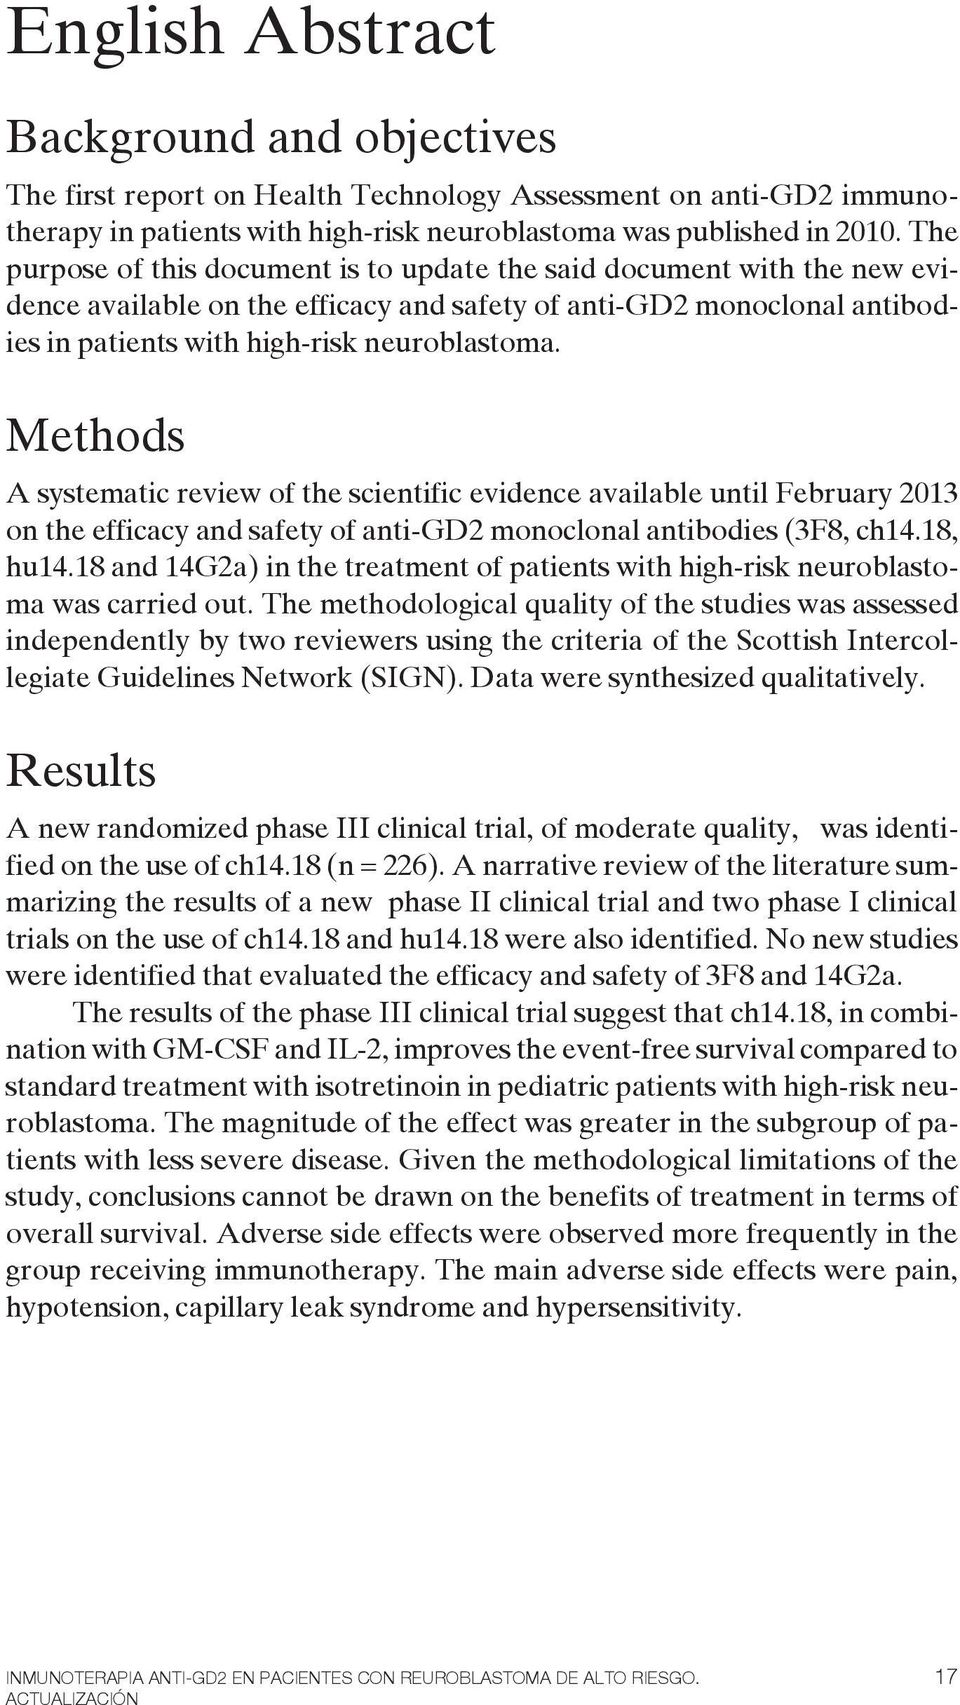 Methods A systematic review of the scientific evidence available until February 2013 on the efficacy and safety of anti-gd2 monoclonal antibodies (3F8, ch14.18, hu14.